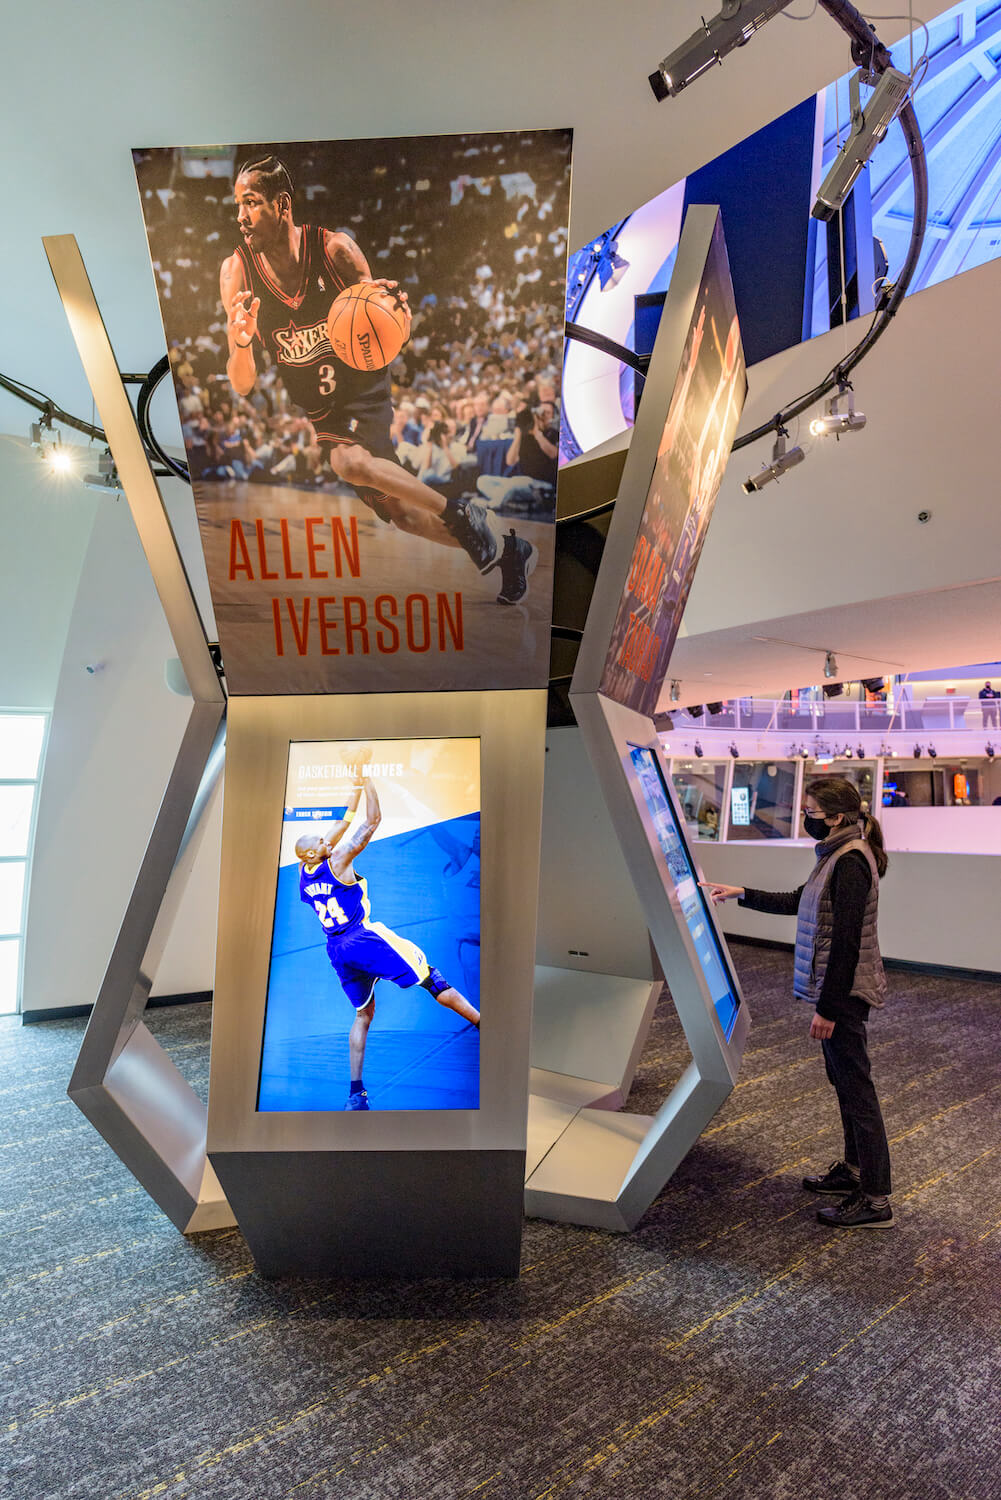 Interior image of the Basketball Hall of Fame and interactive installations